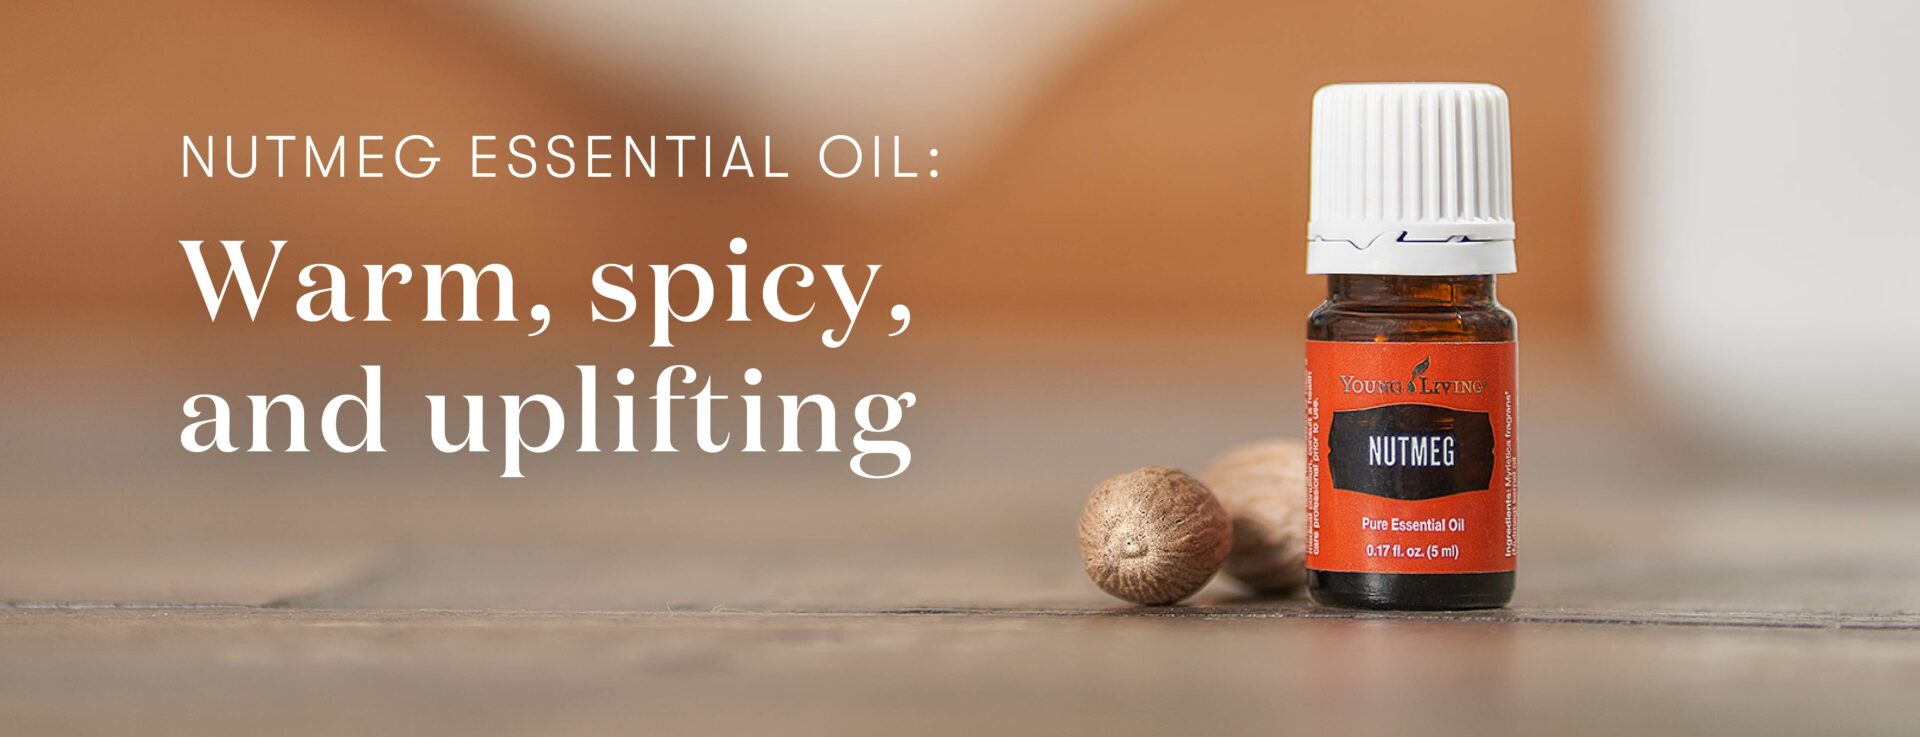 Nutmeg essential oil: Warm, spicy, and uplifting - Young Living Lavender Life Blog